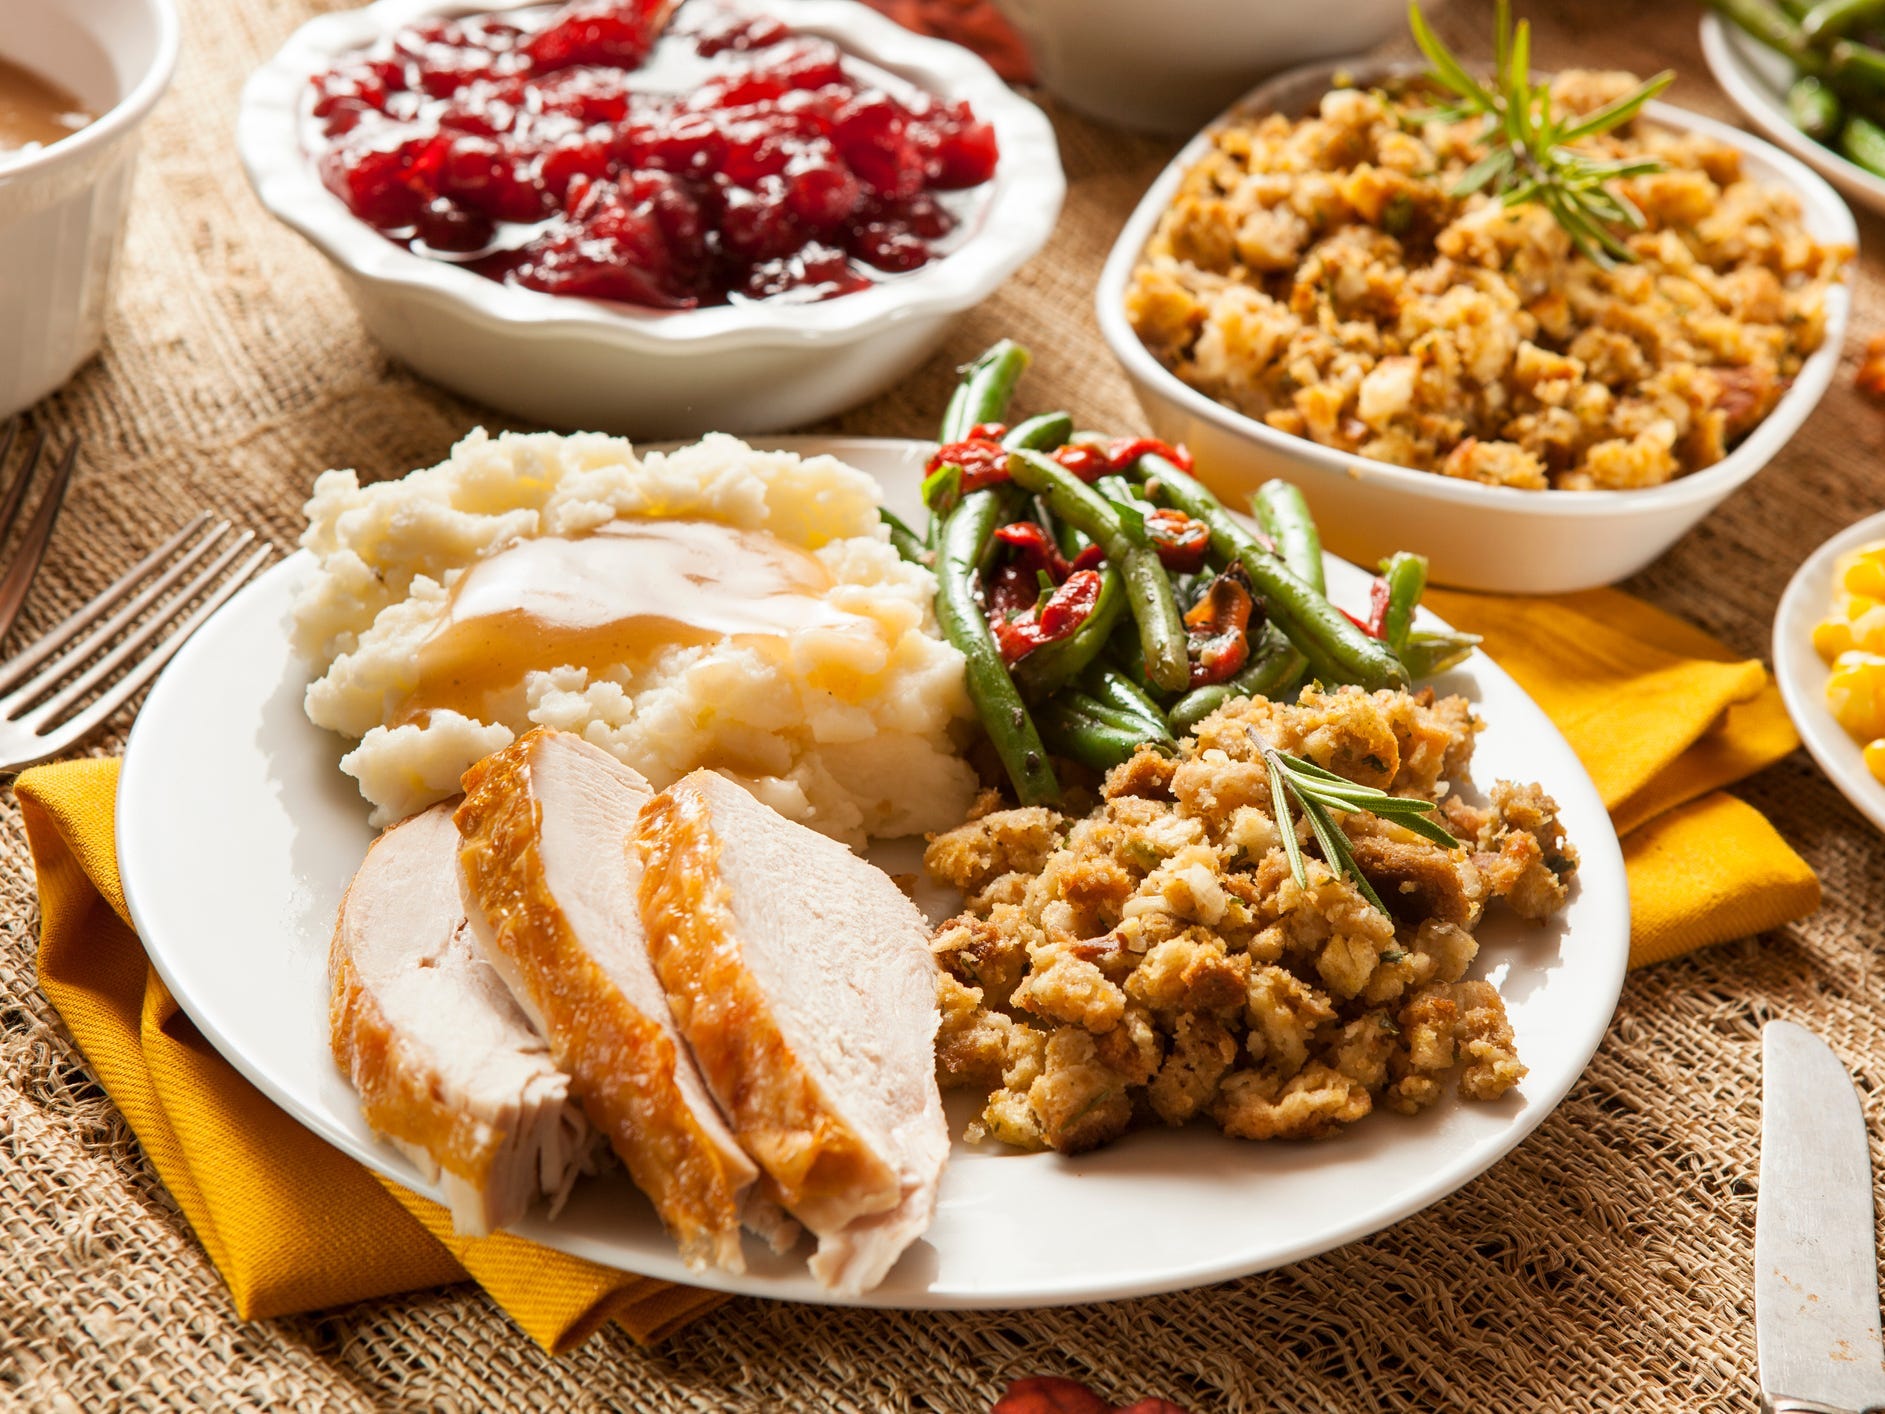 A classic Thanksgiving dinner with spiced turkey, stuffing, mashed potatoes, and green beans